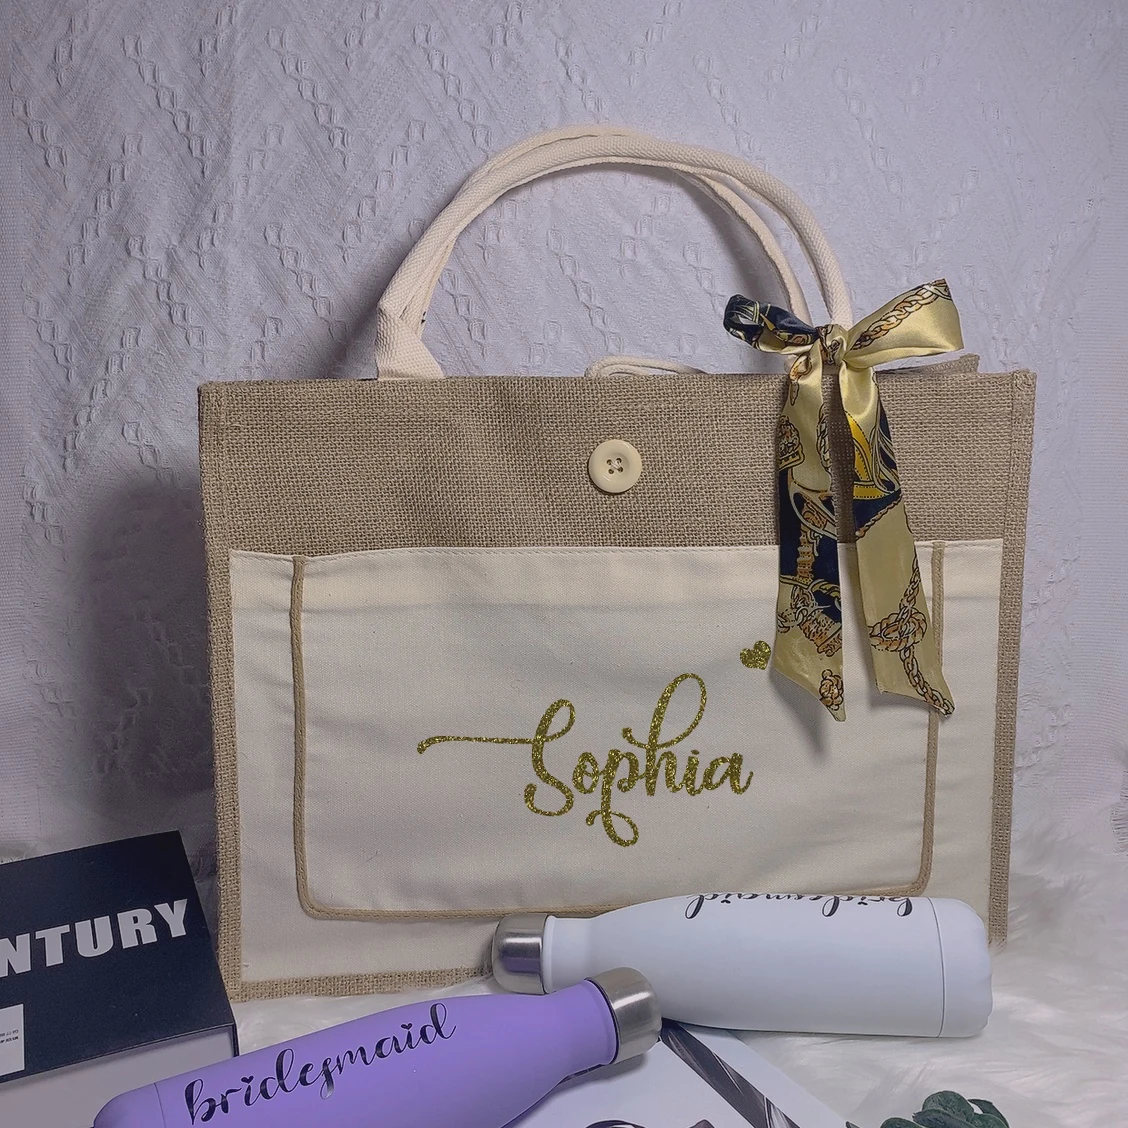 https://ae01.alicdn.com/kf/S77565e81f56e45979742213911d652c8a/Personalized-Gift-Bag-With-Logo-And-Name-Team-Bride-Gift-Bags-Bridesmaid-Gift-Box-Proposal-Tote.jpg